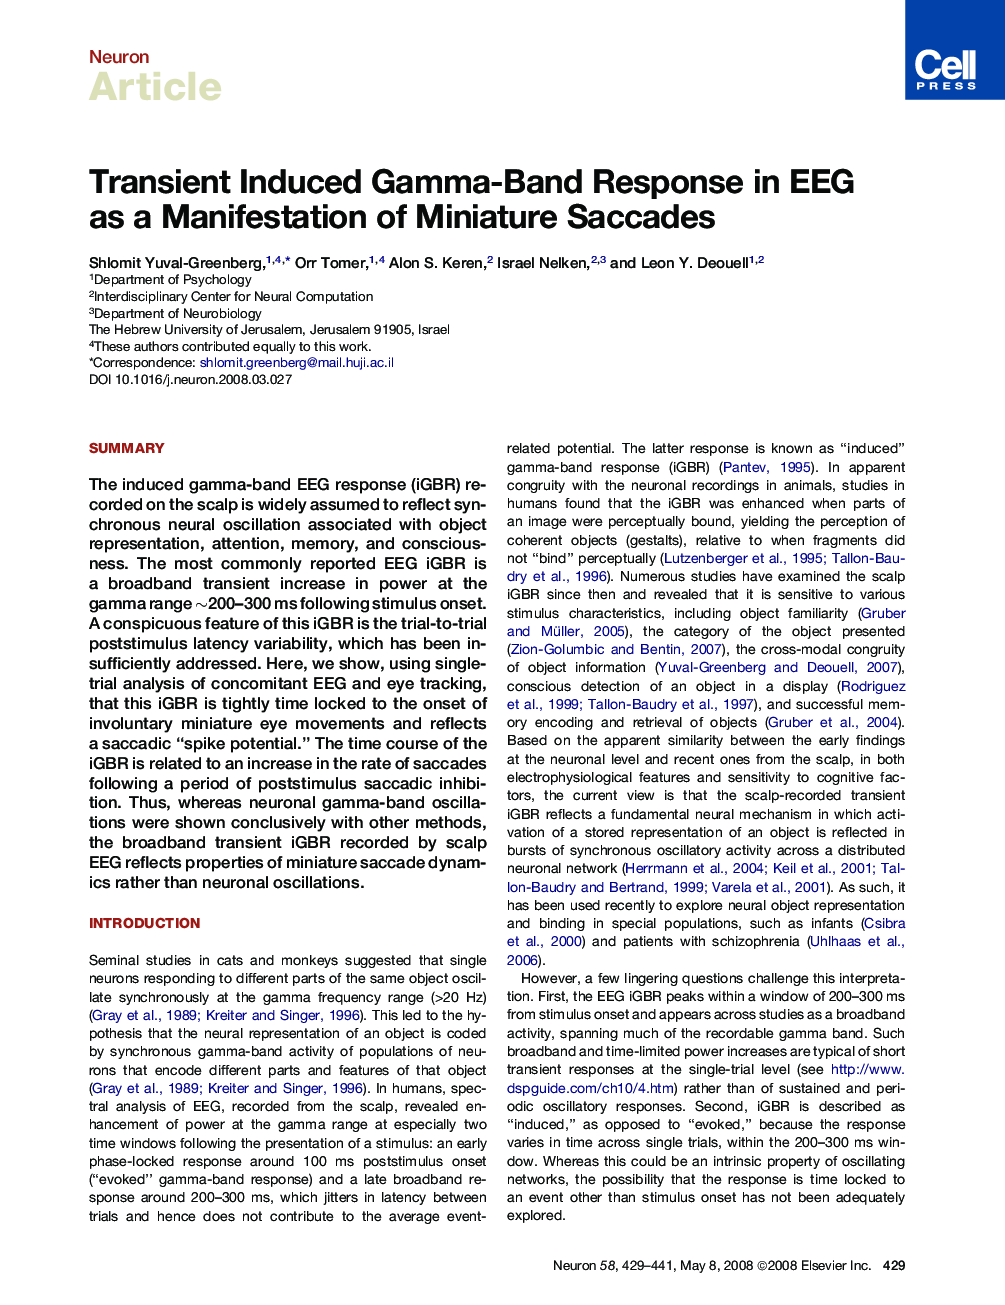 Transient Induced Gamma-Band Response in EEG as a Manifestation of Miniature Saccades